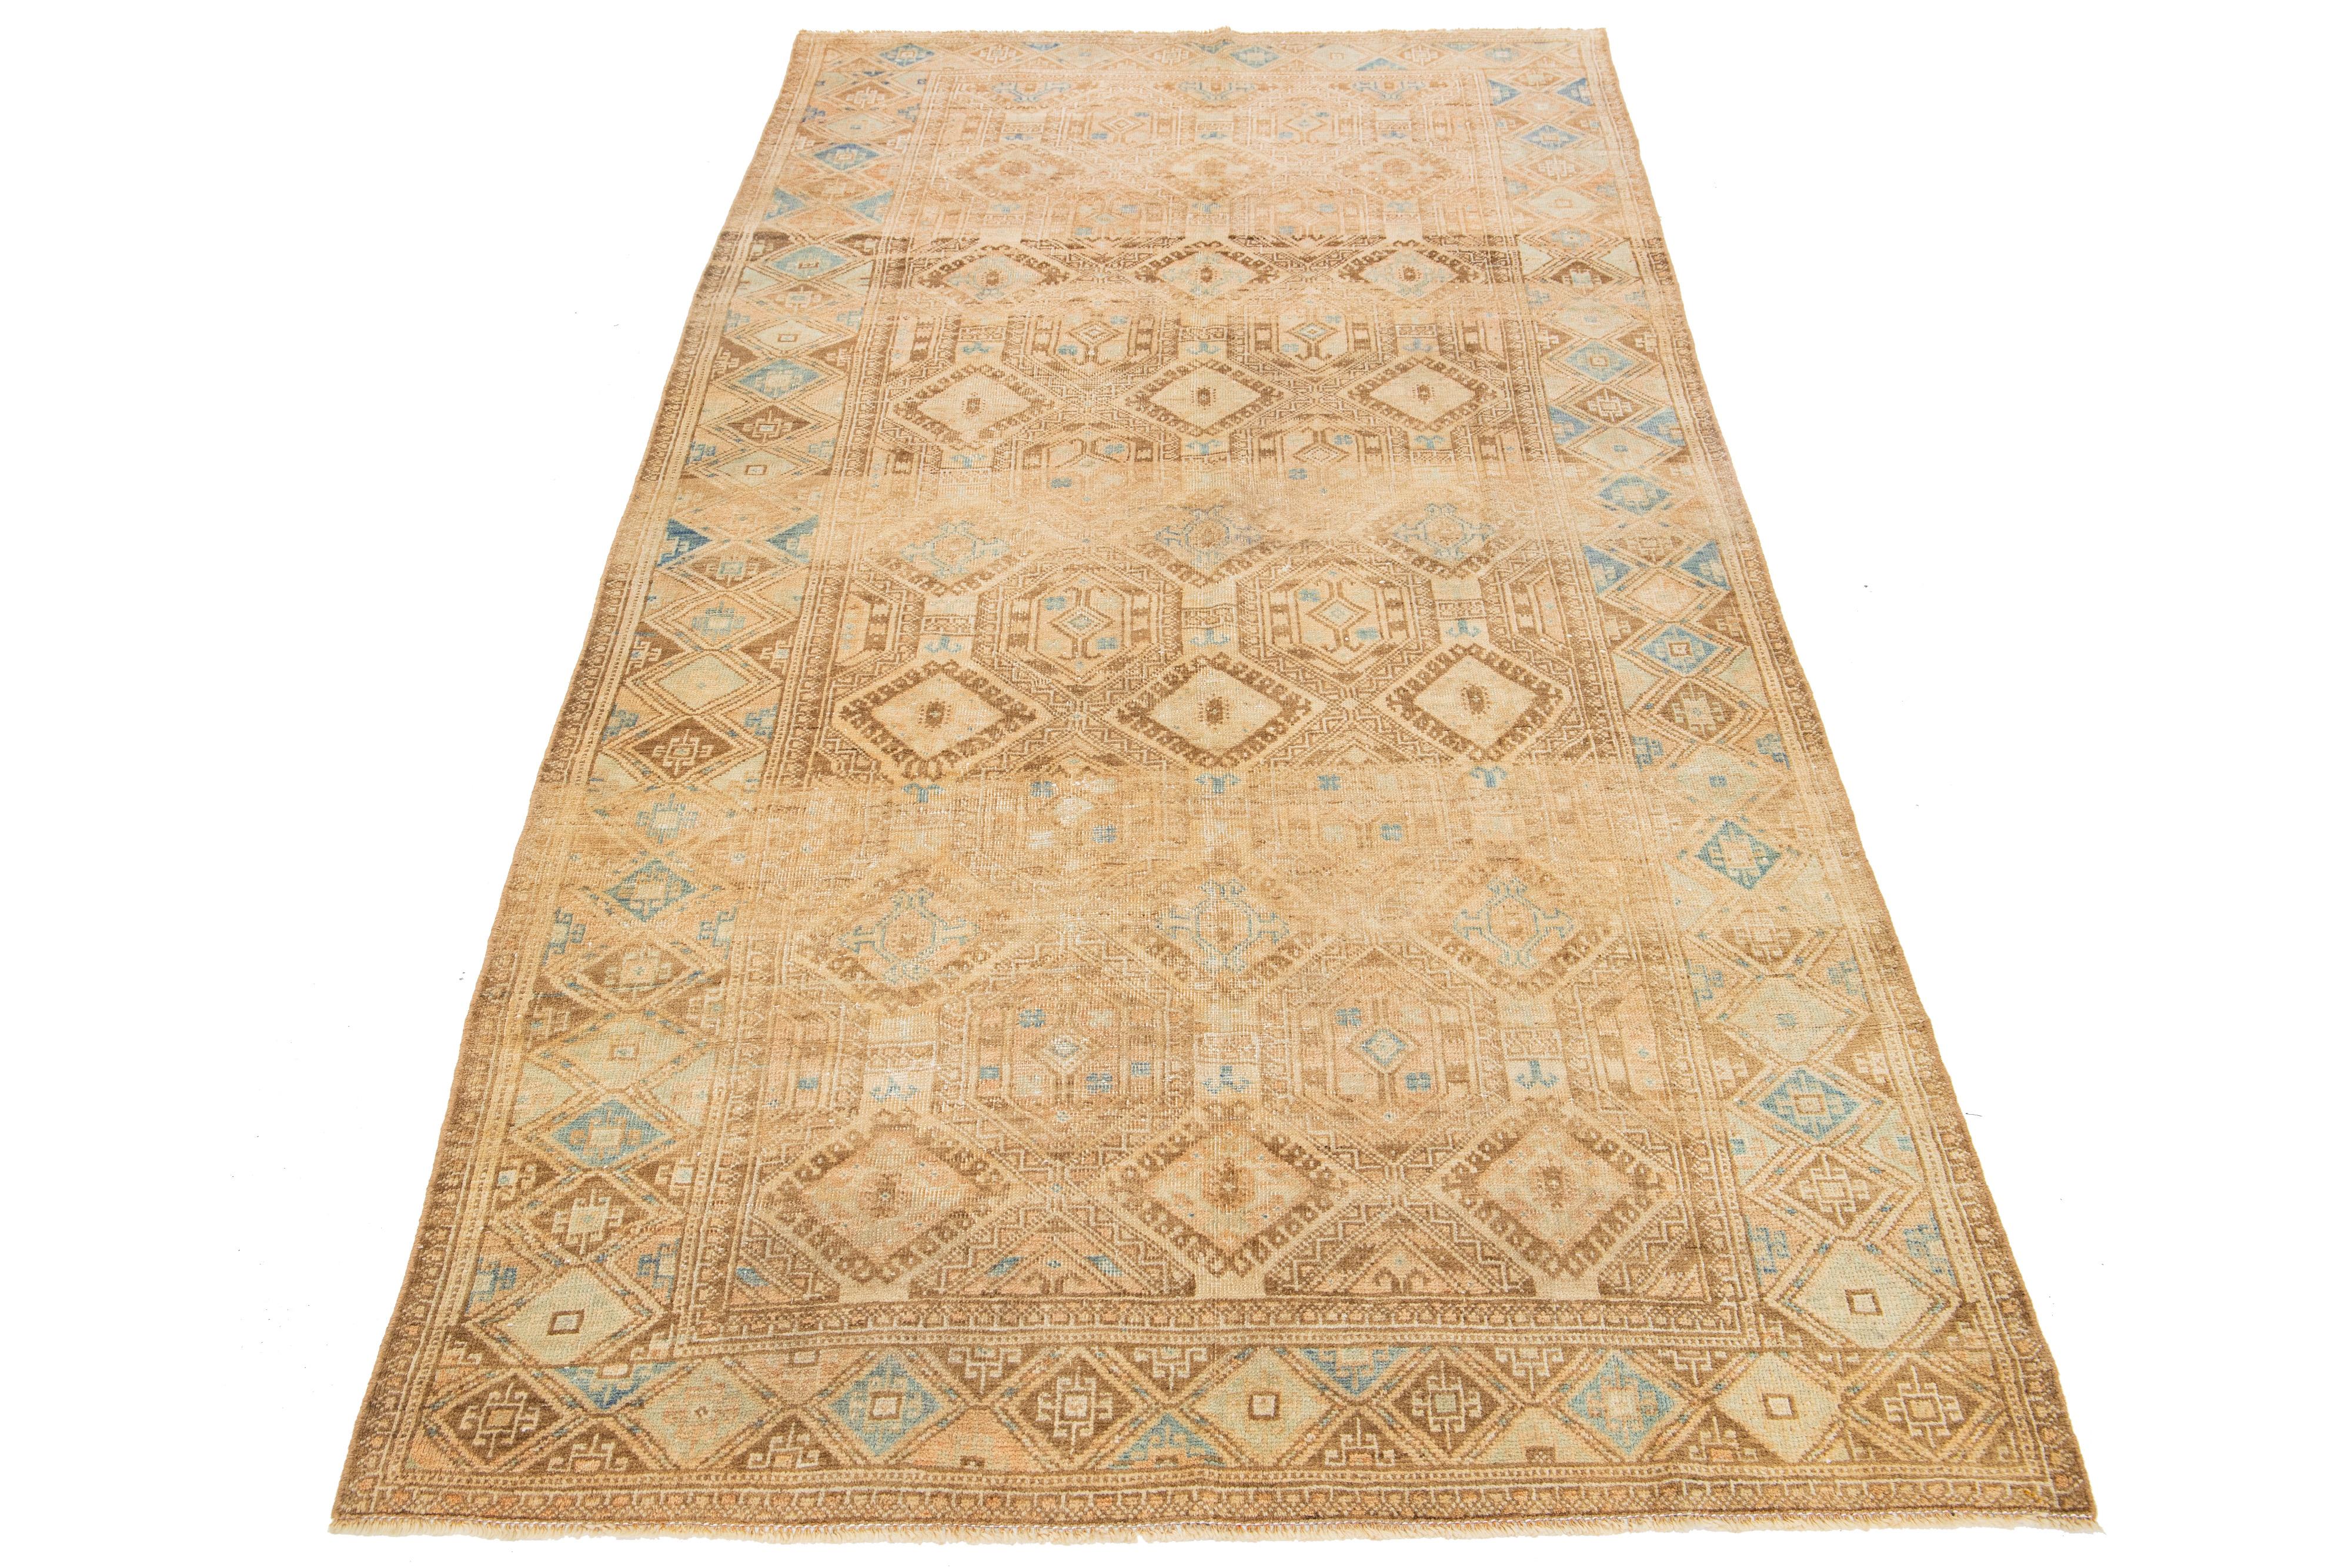 Beautiful vintage Persian hand-knotted wool rug with a beige color field. This piece has a designed frame with blue and brown accents in a gorgeous all-over geometric pattern.

This rug measures 4'10